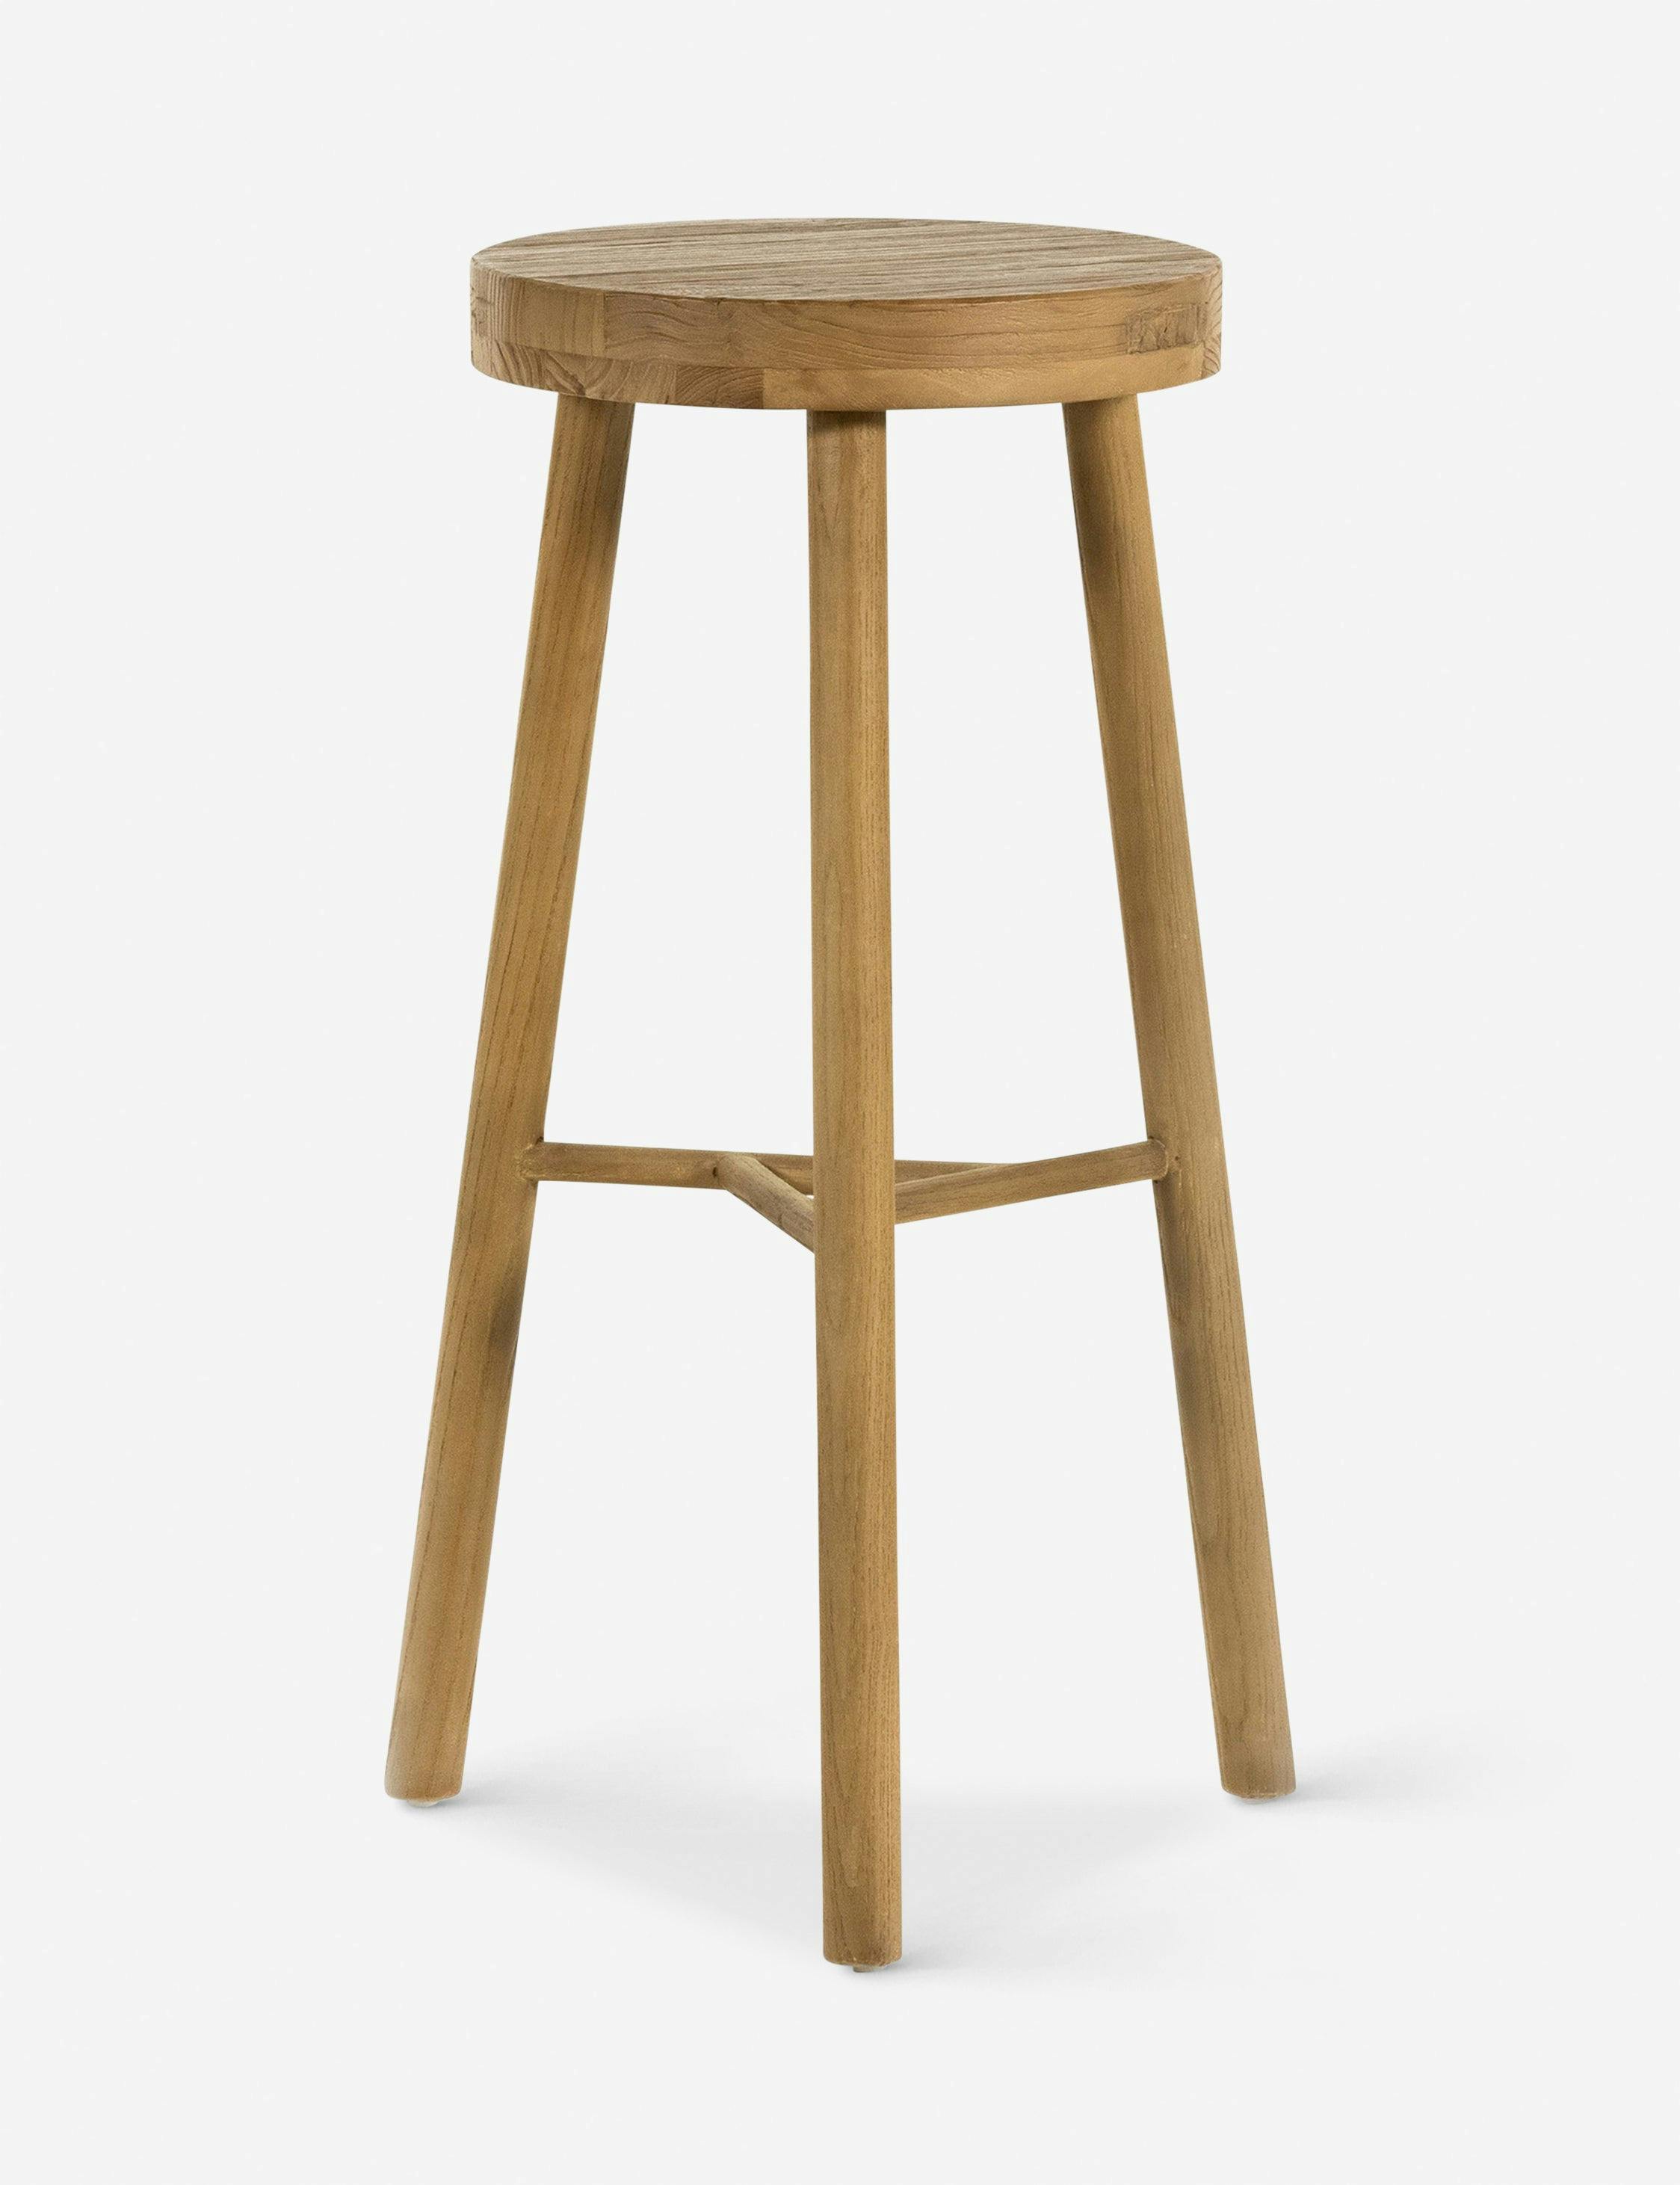 Rustic Nettlewood and Elm Bar Stool in White